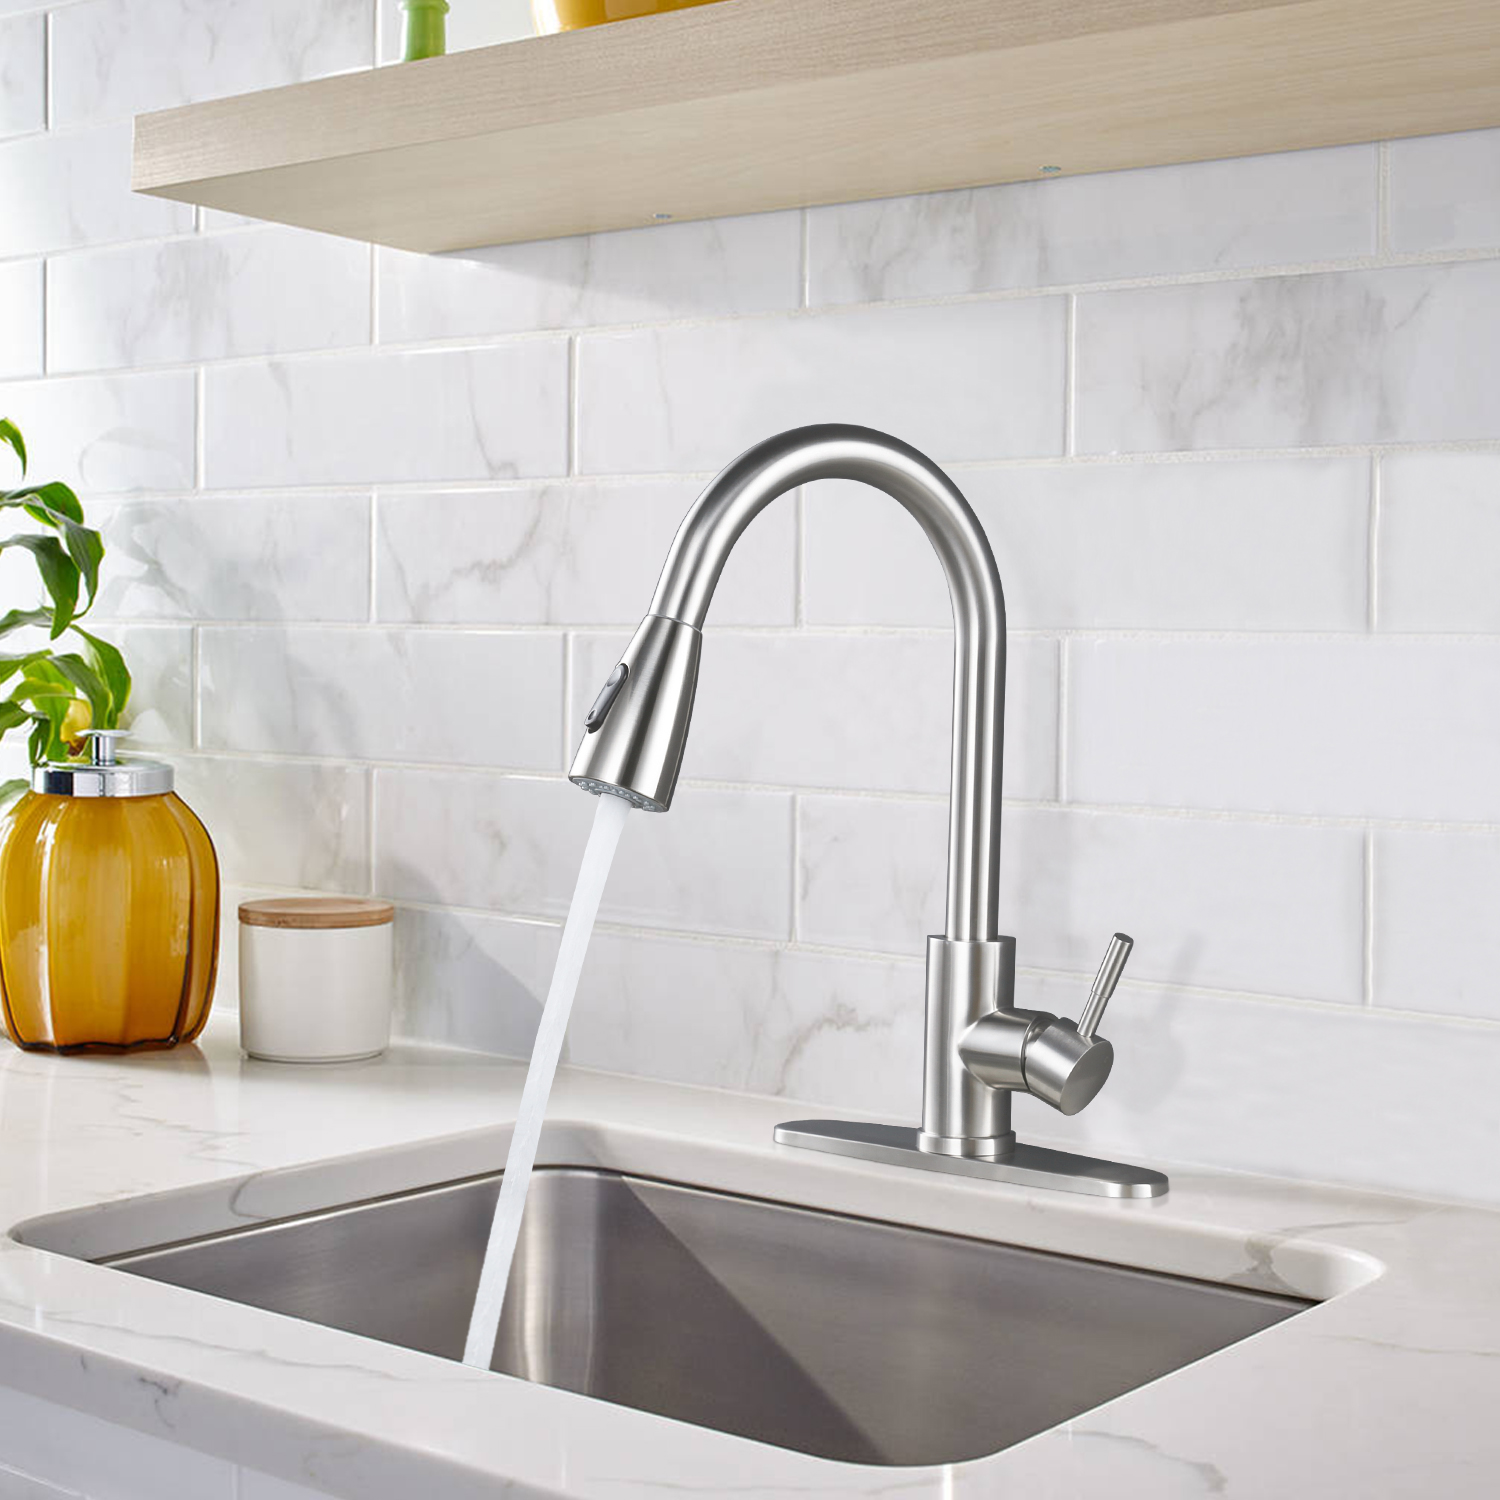 New faucet standards will be implemented next month 